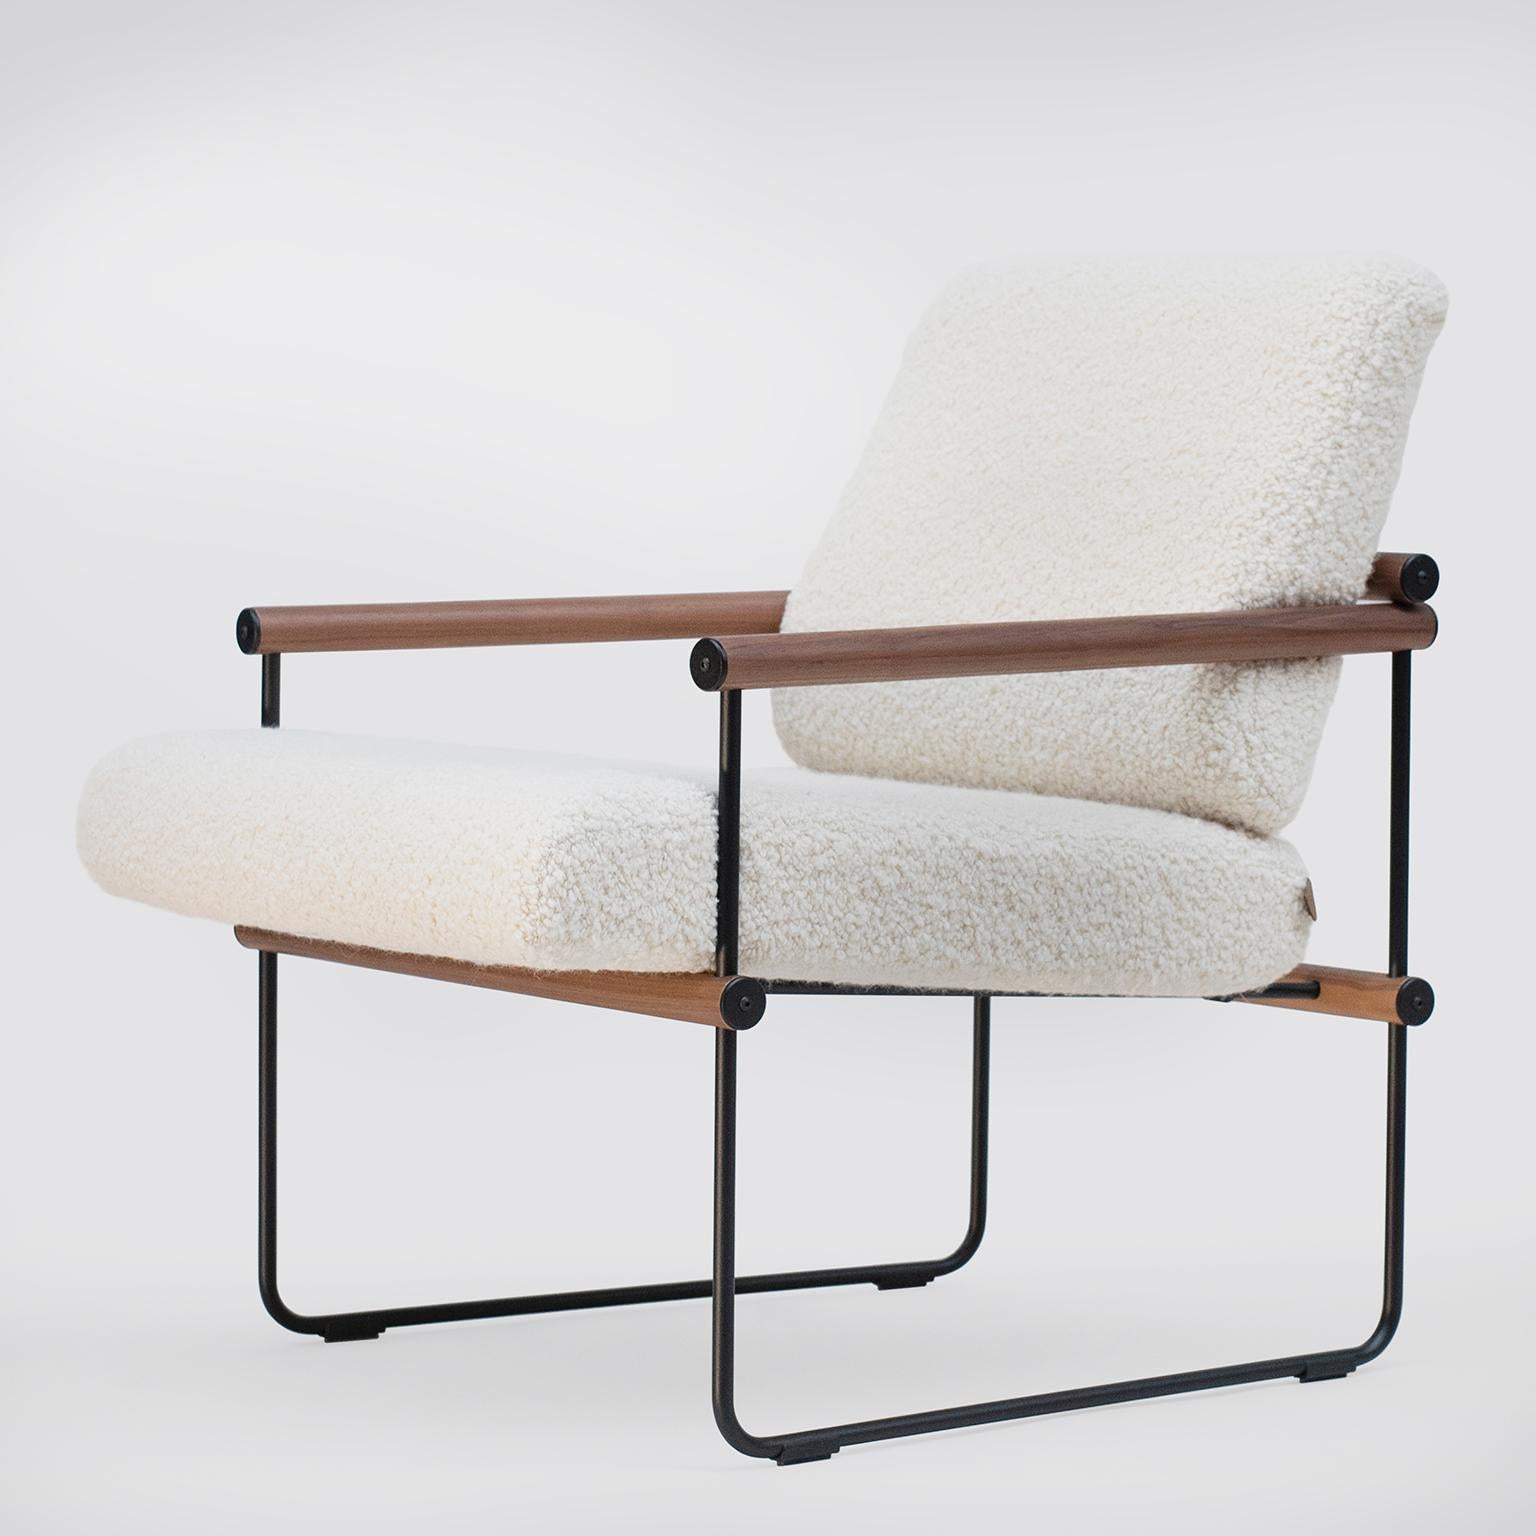 This Mid-Century Modern armchair ‘Audrey Safari’ is a comfortable chair and designed by GHYCZY. The backrest of this chair can be adjusted to the preferences of its owner. The minimalistic chair’s playful construction of solid wooden rods and metal